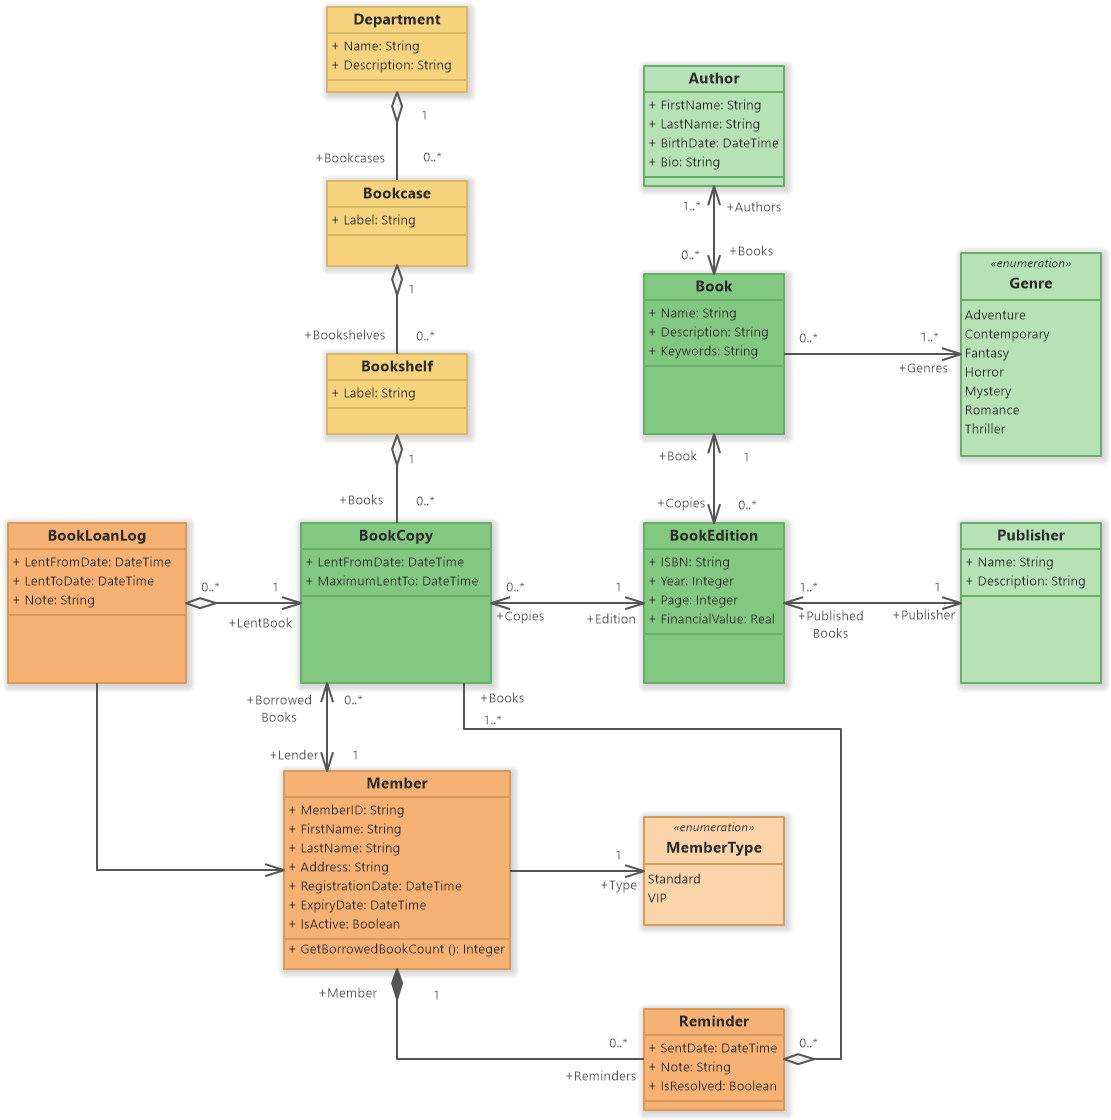 [DIAGRAM] All Uml Diagrams For Library Management System - MYDIAGRAM.ONLINE